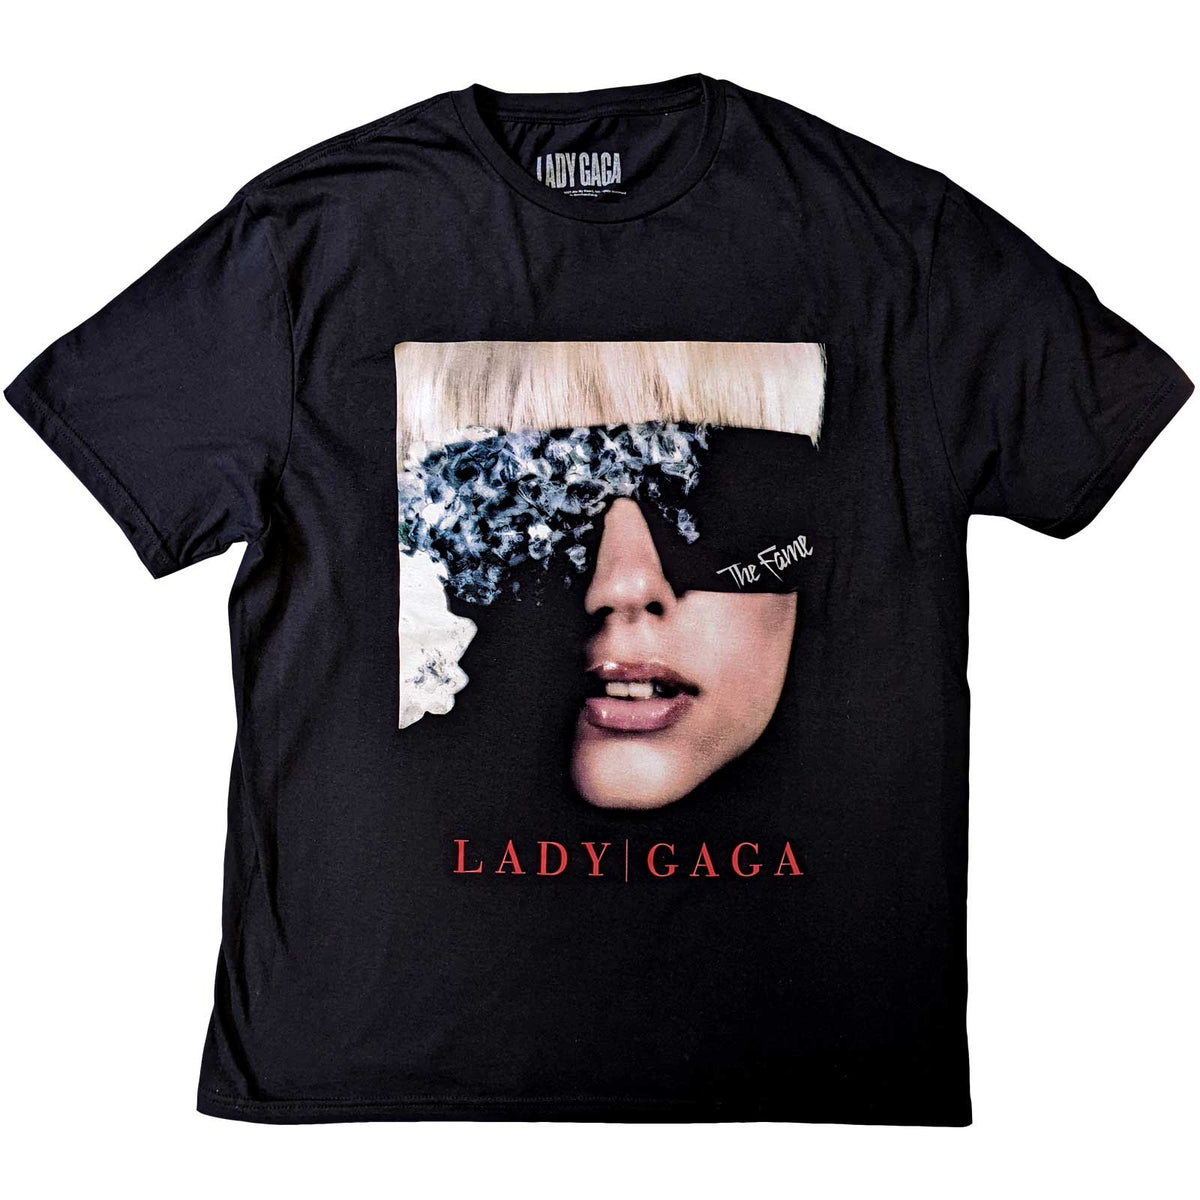 Lady Gaga T-Shirt - The Fame Photo - Unisex Official Licensed Design